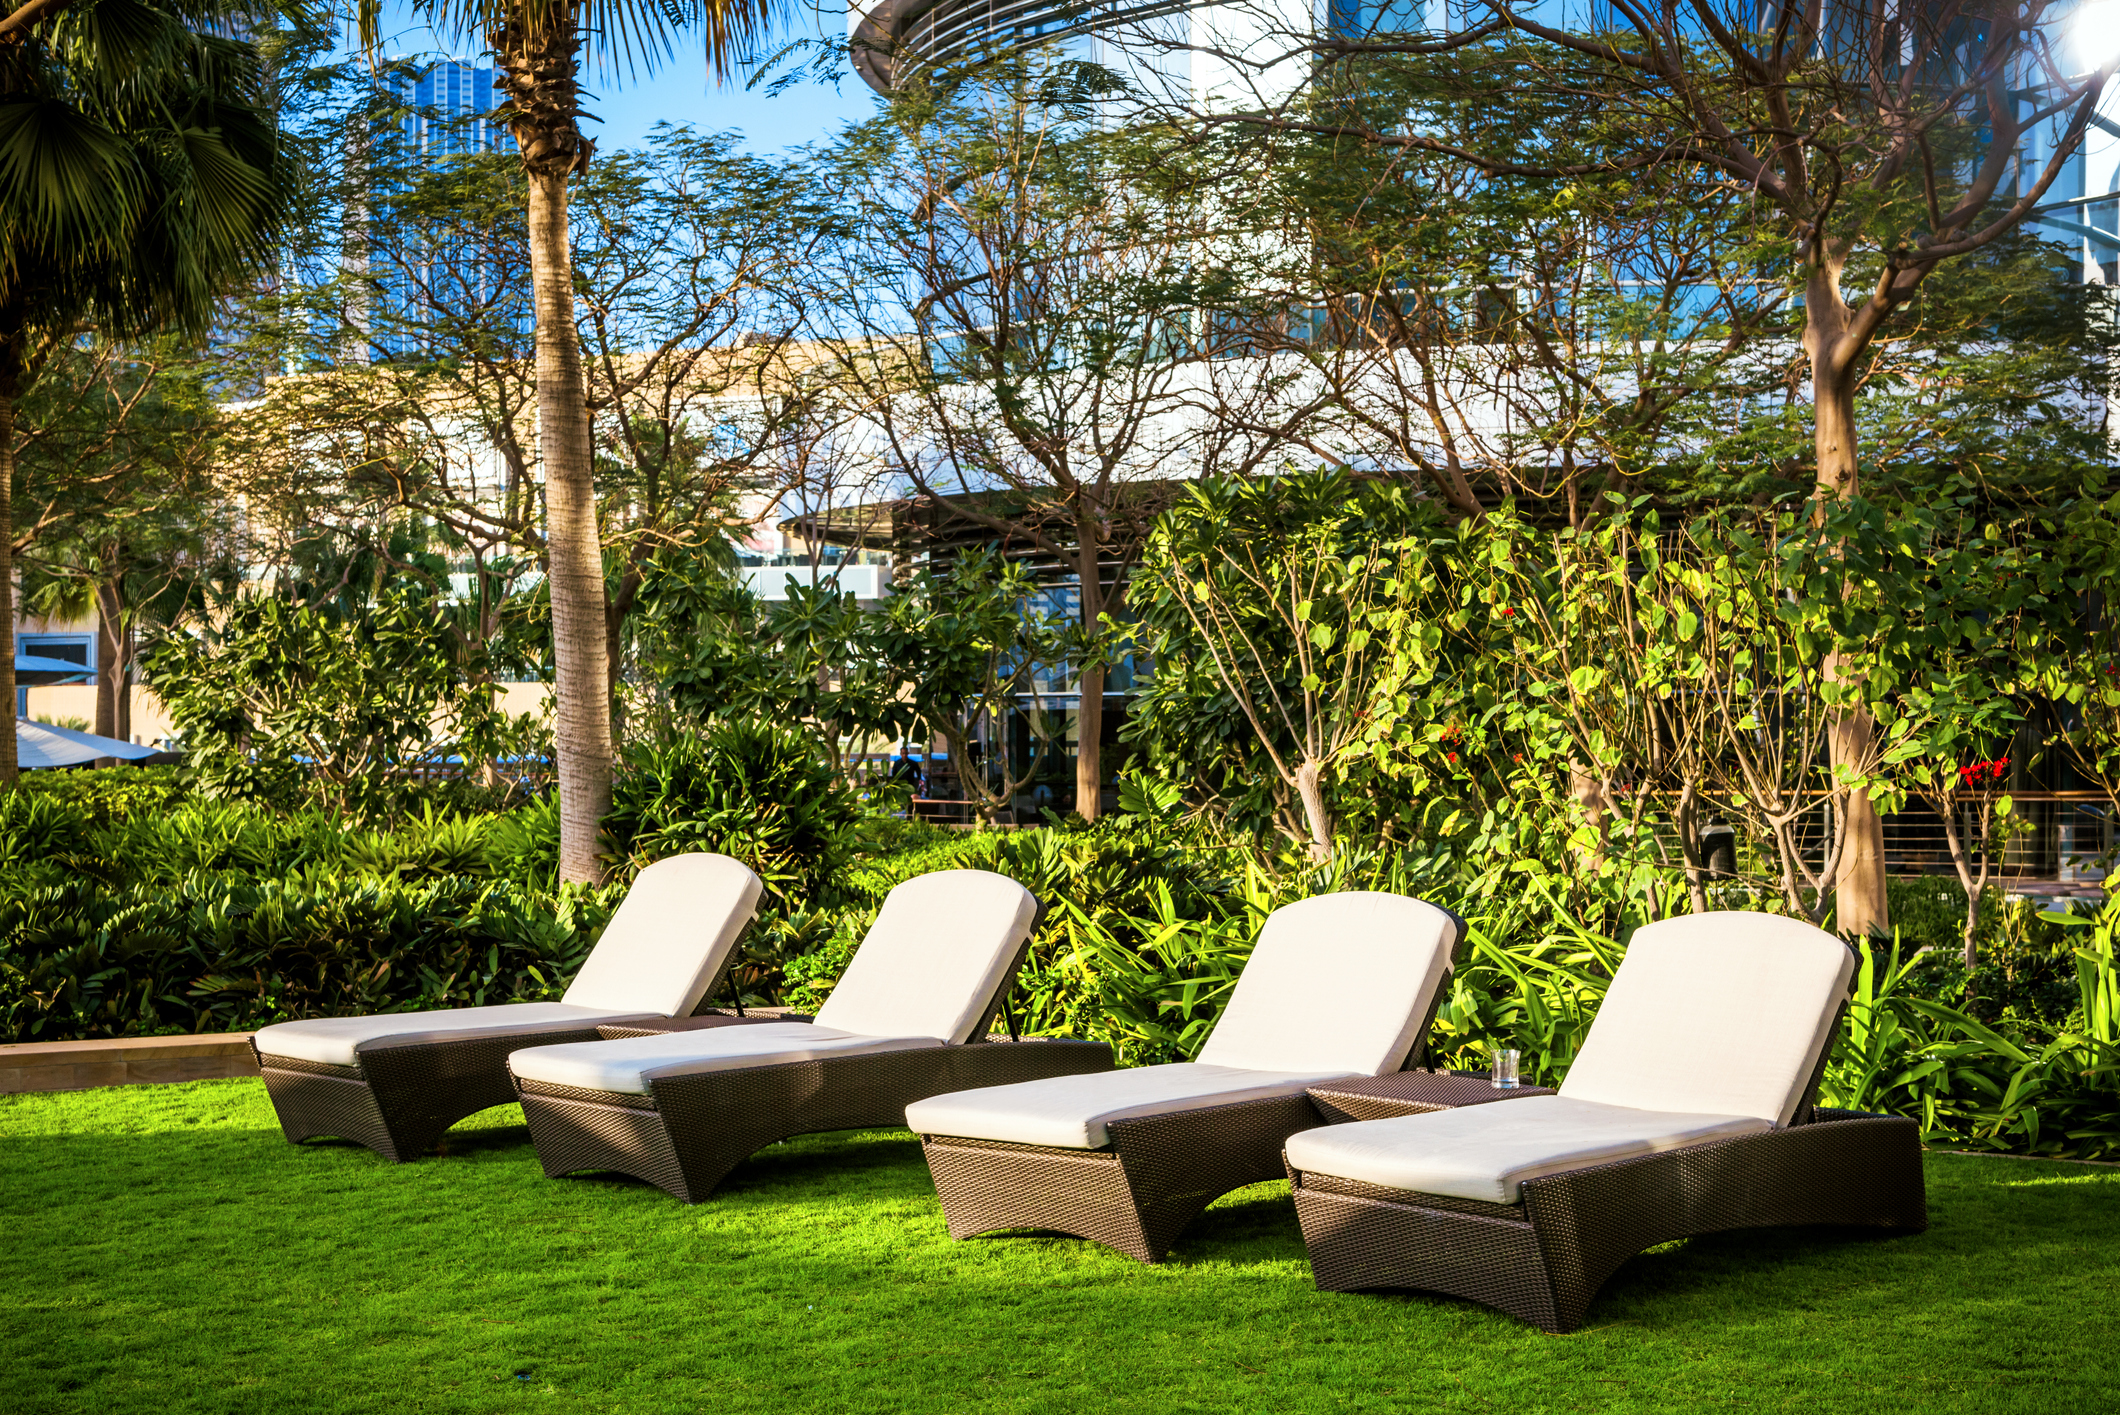 Four loungers in a relaxed and restful area..